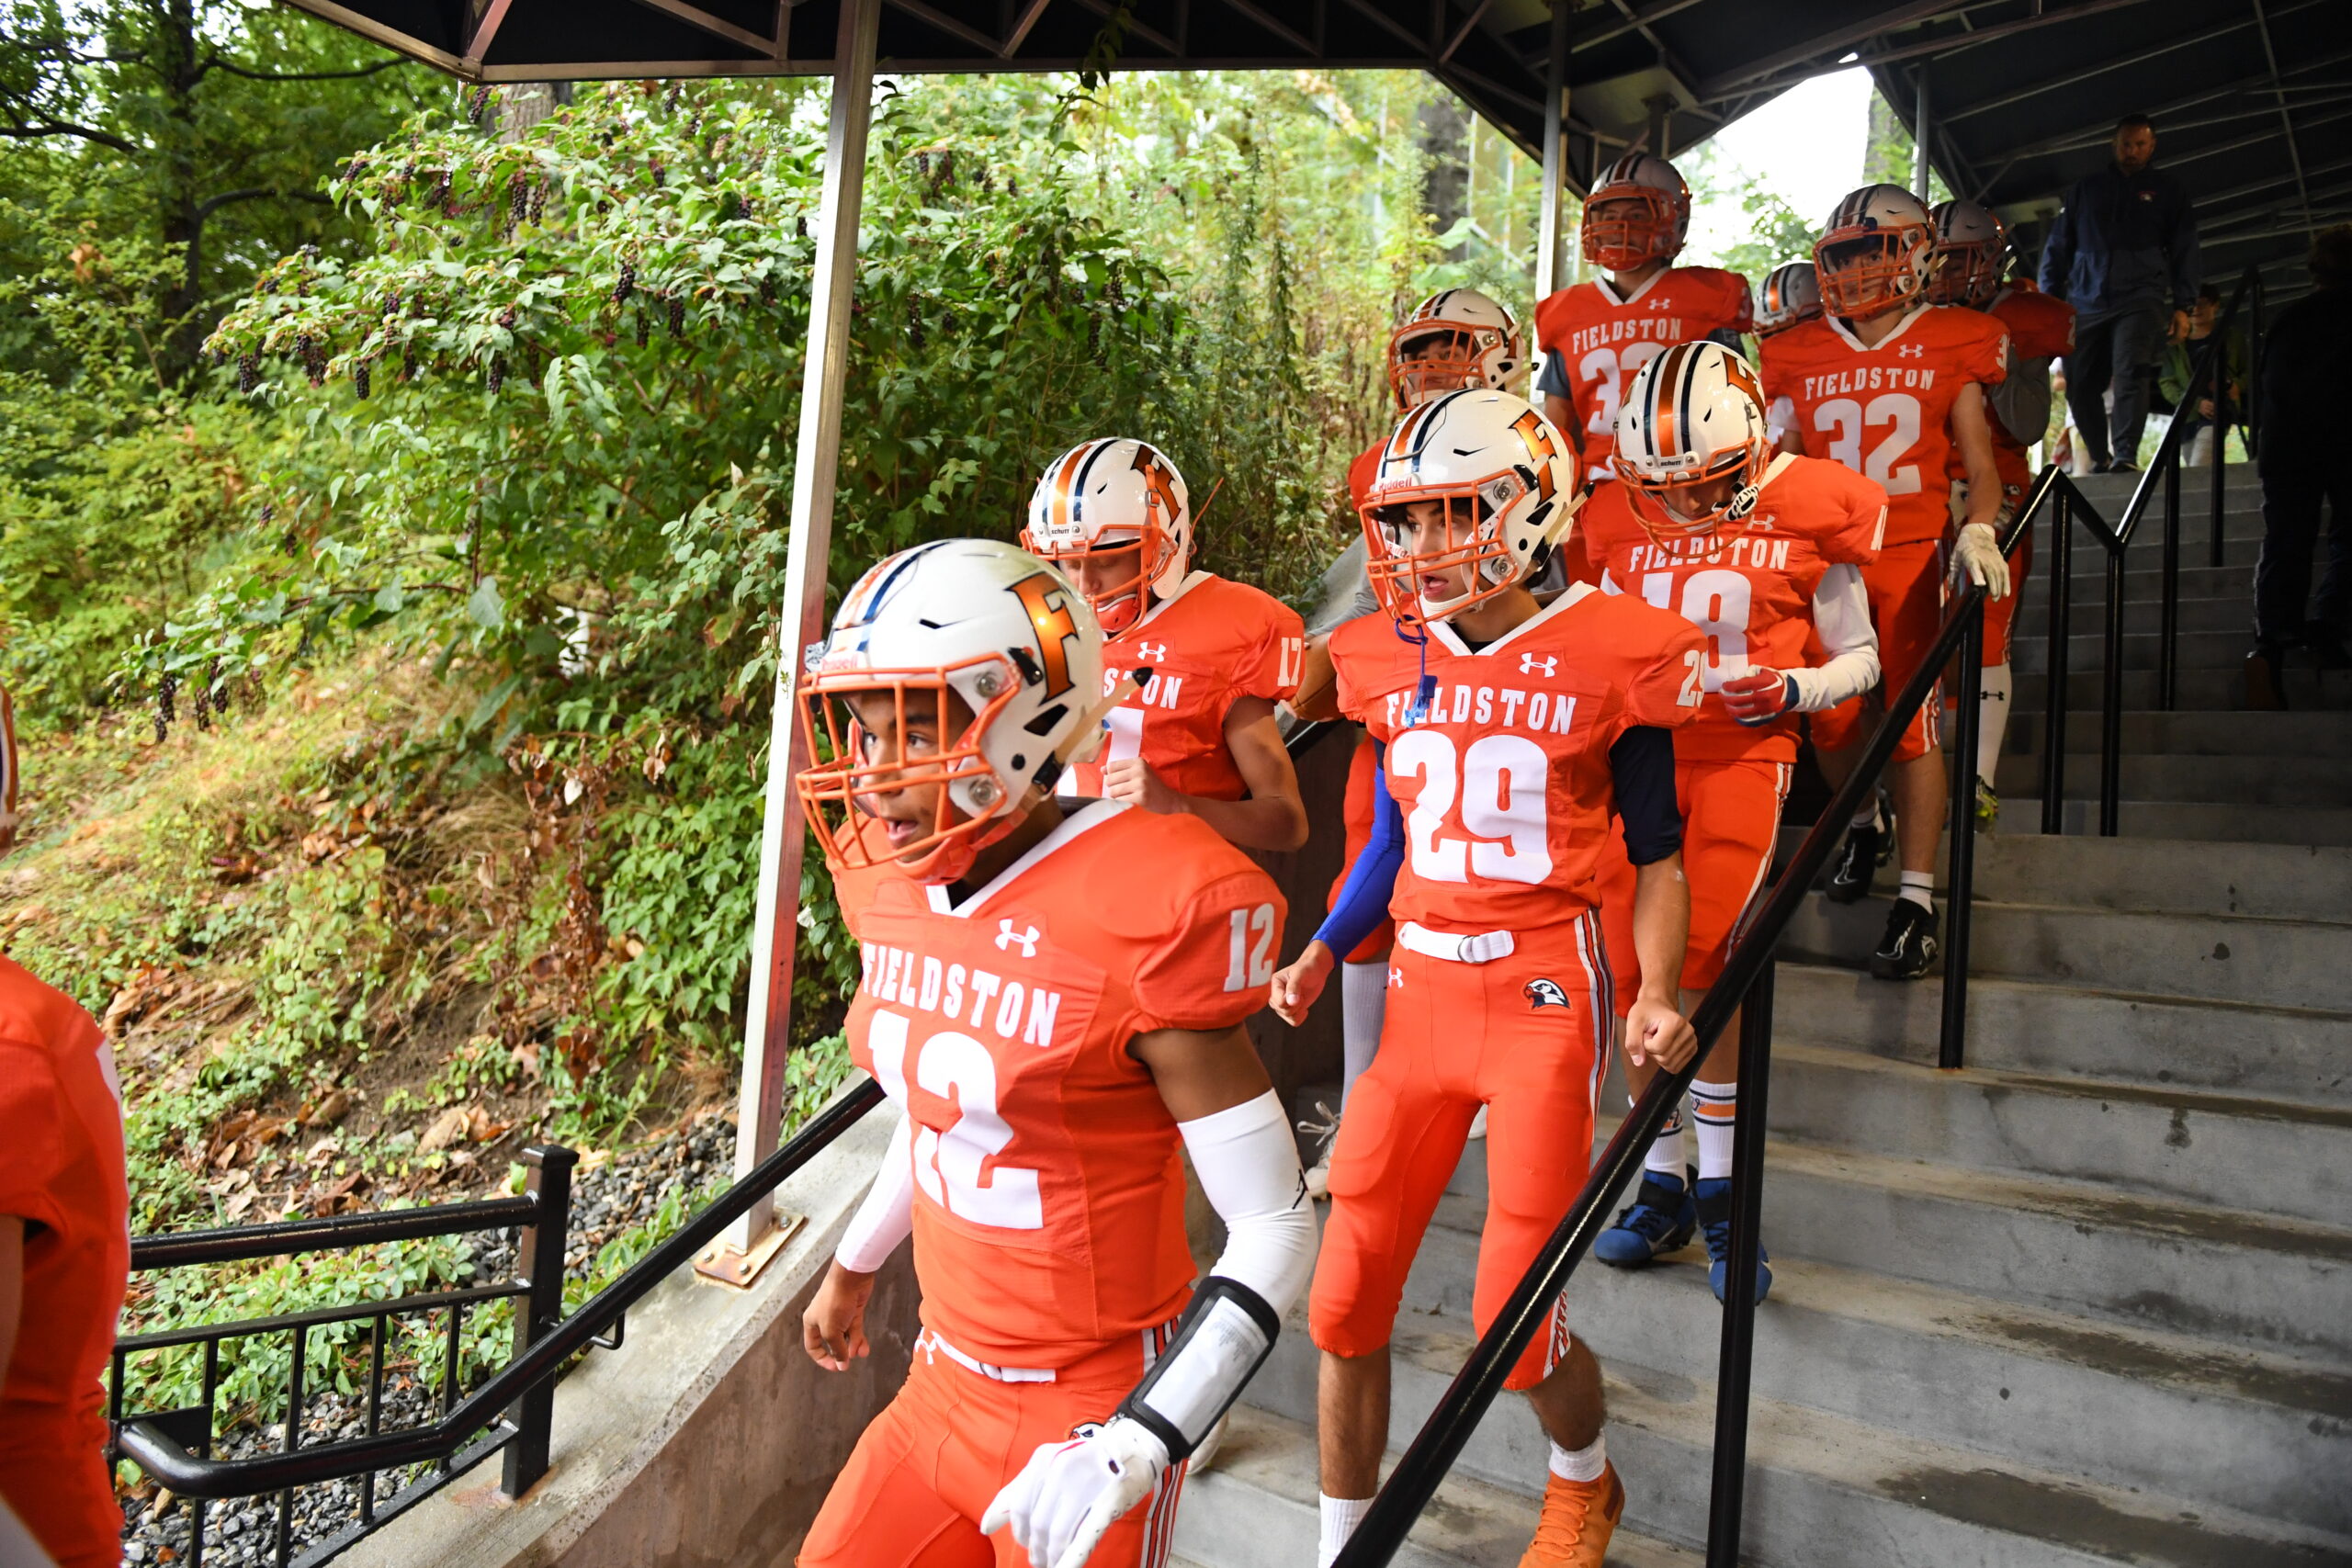 The Fieldston football team descends the steps towards the upper field